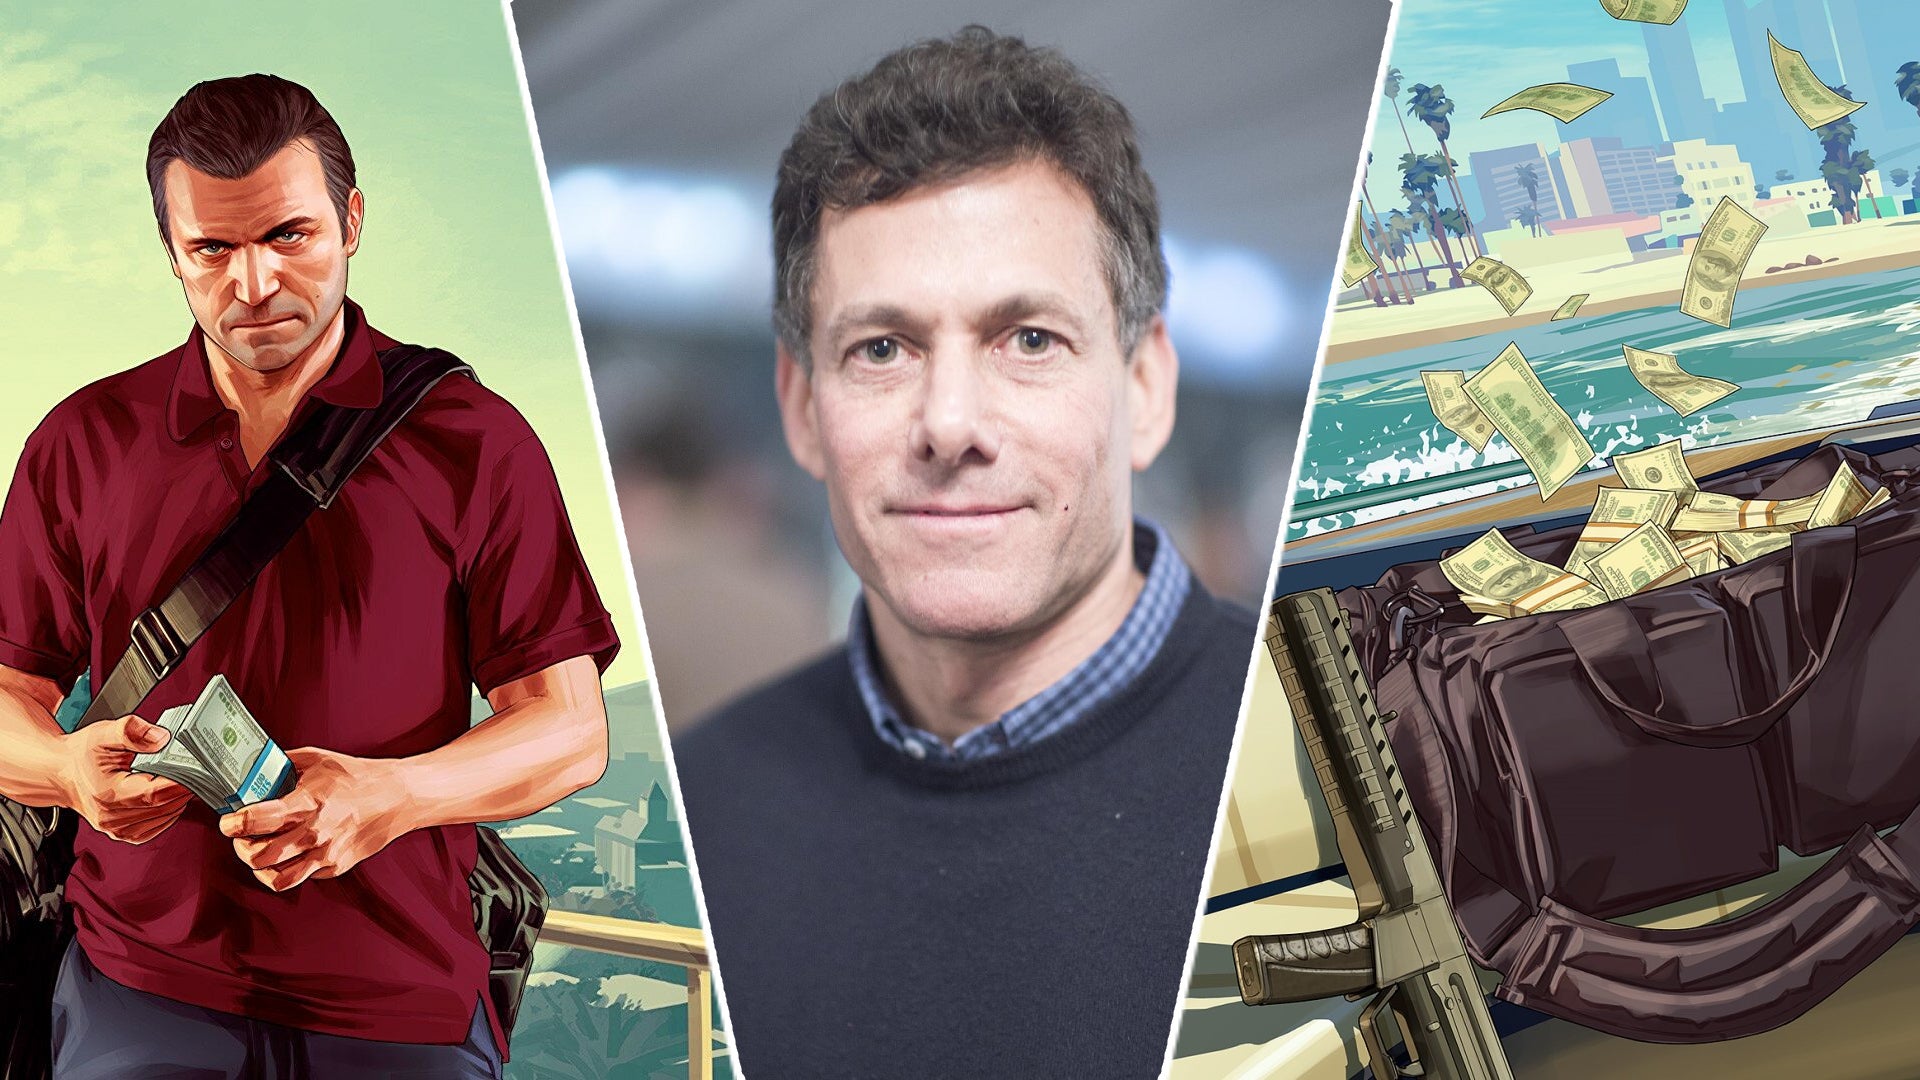 Image for GTA 6 to set "creative benchmark for all entertainment," says Strauss Zelnick